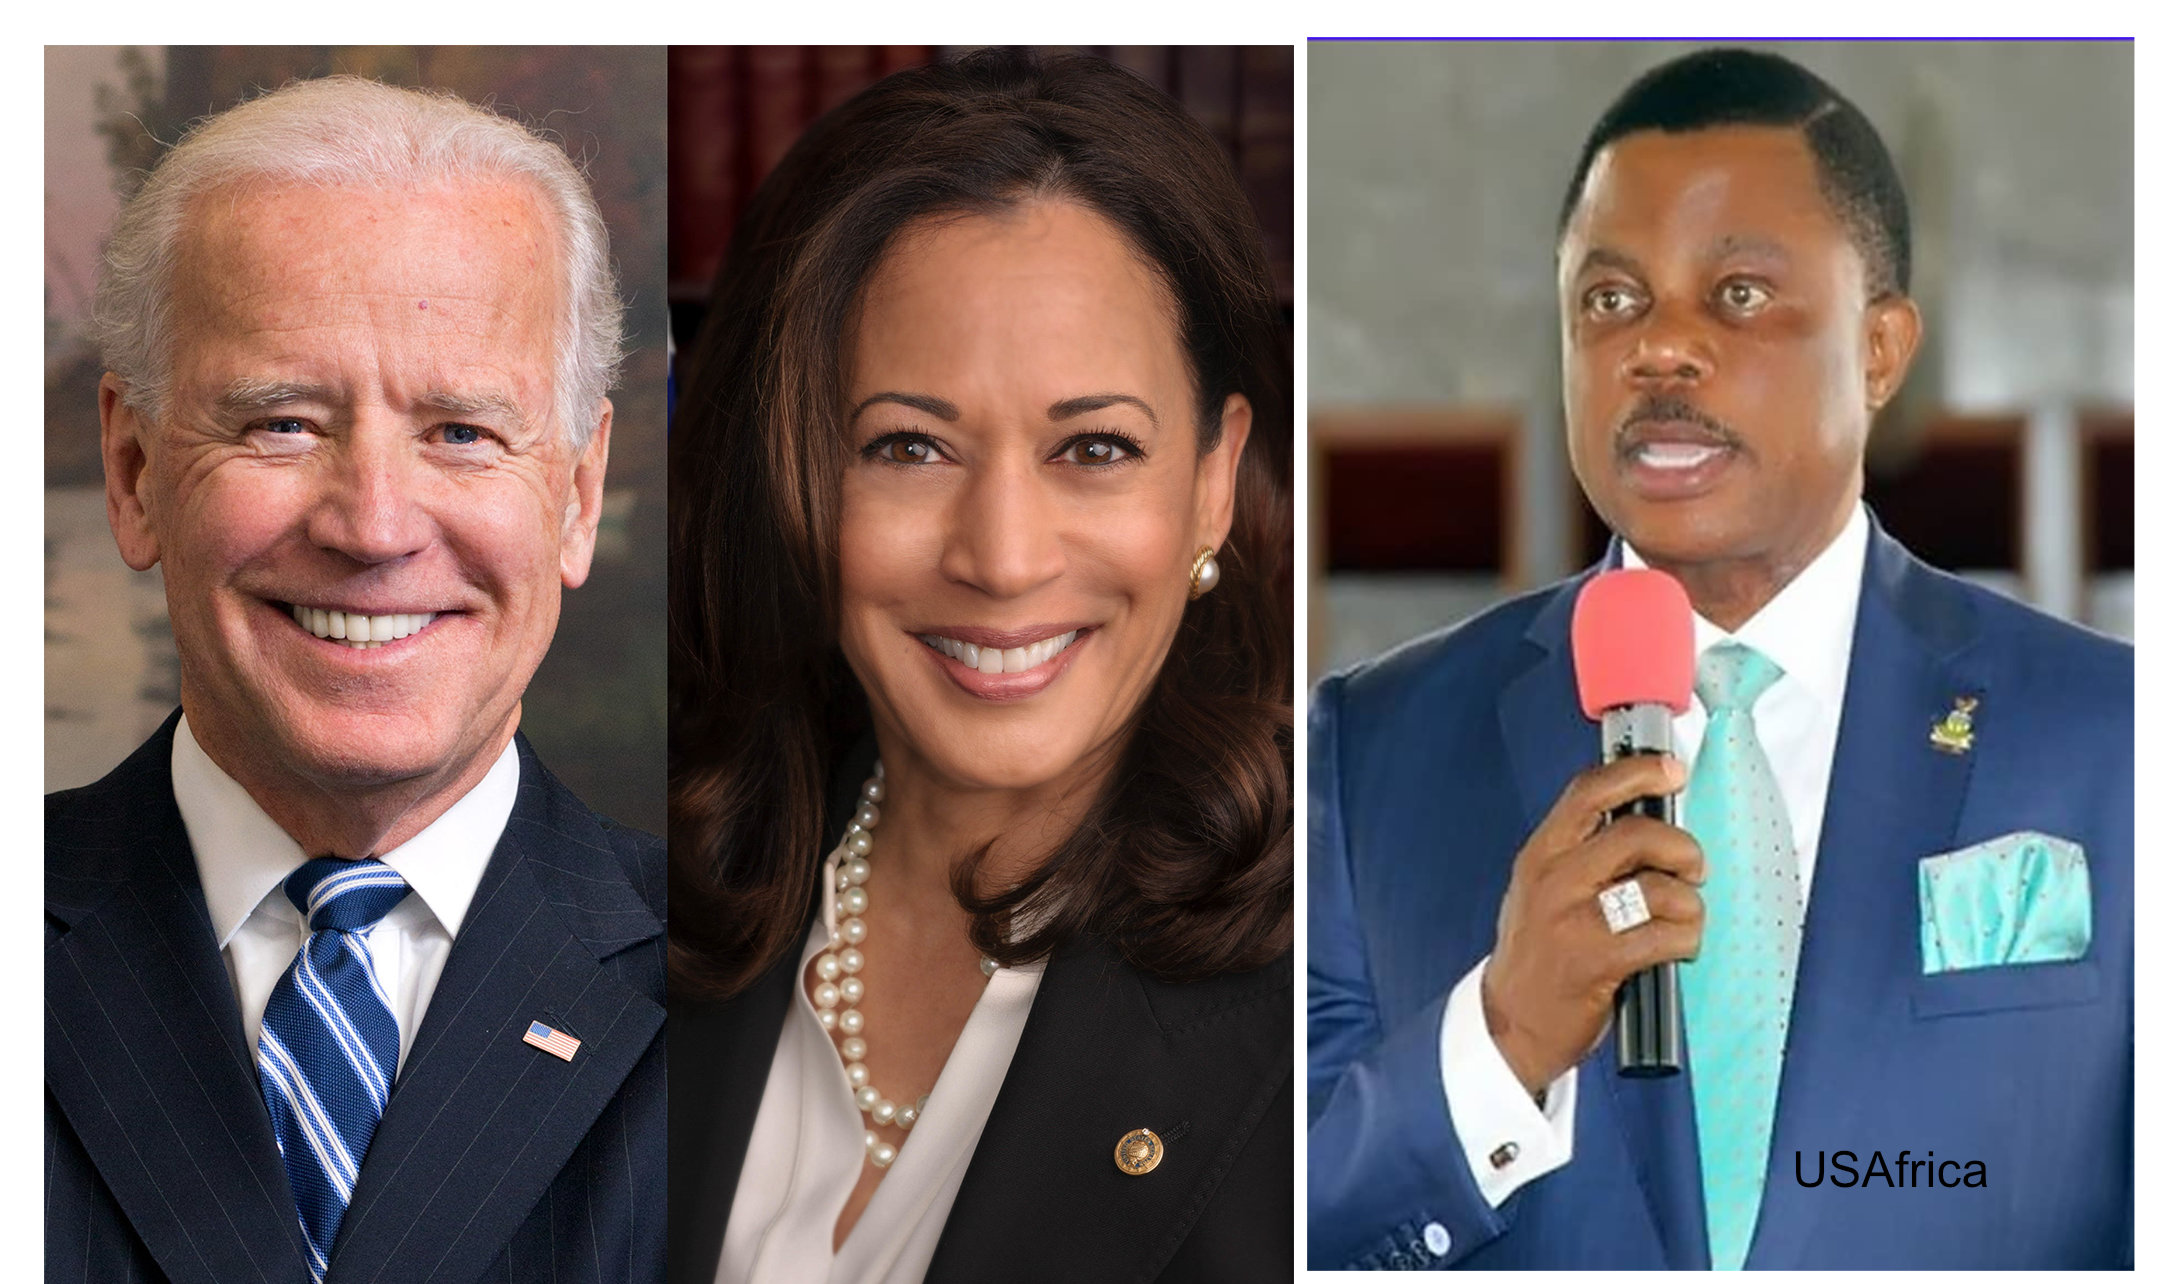 USAfrica: Obiano hails Biden, Harris for "outstanding dedication to public service"